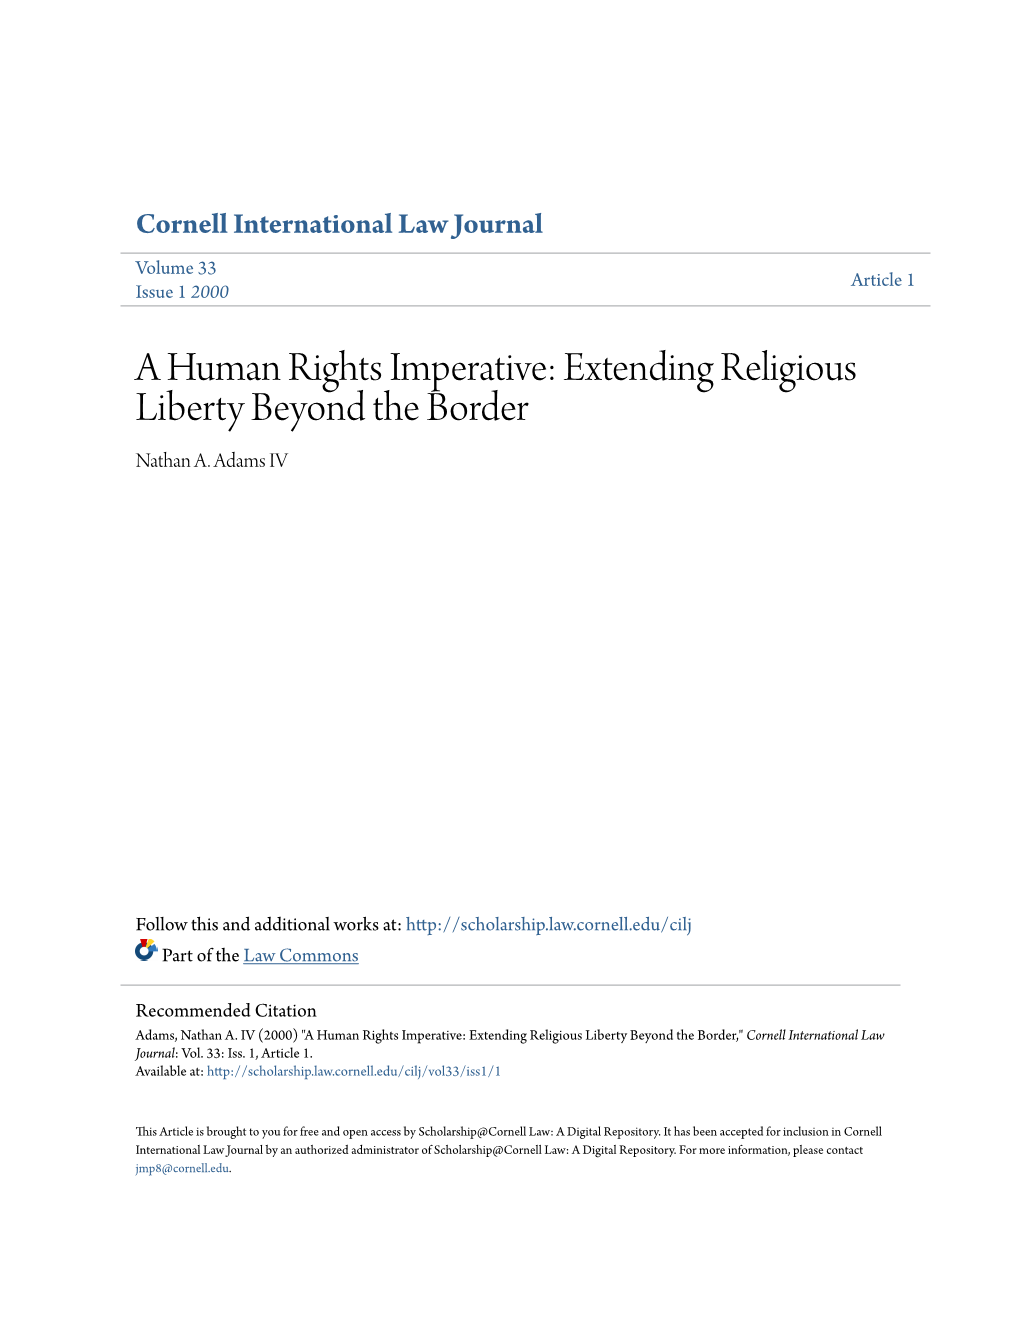 A Human Rights Imperative: Extending Religious Liberty Beyond the Border Nathan A